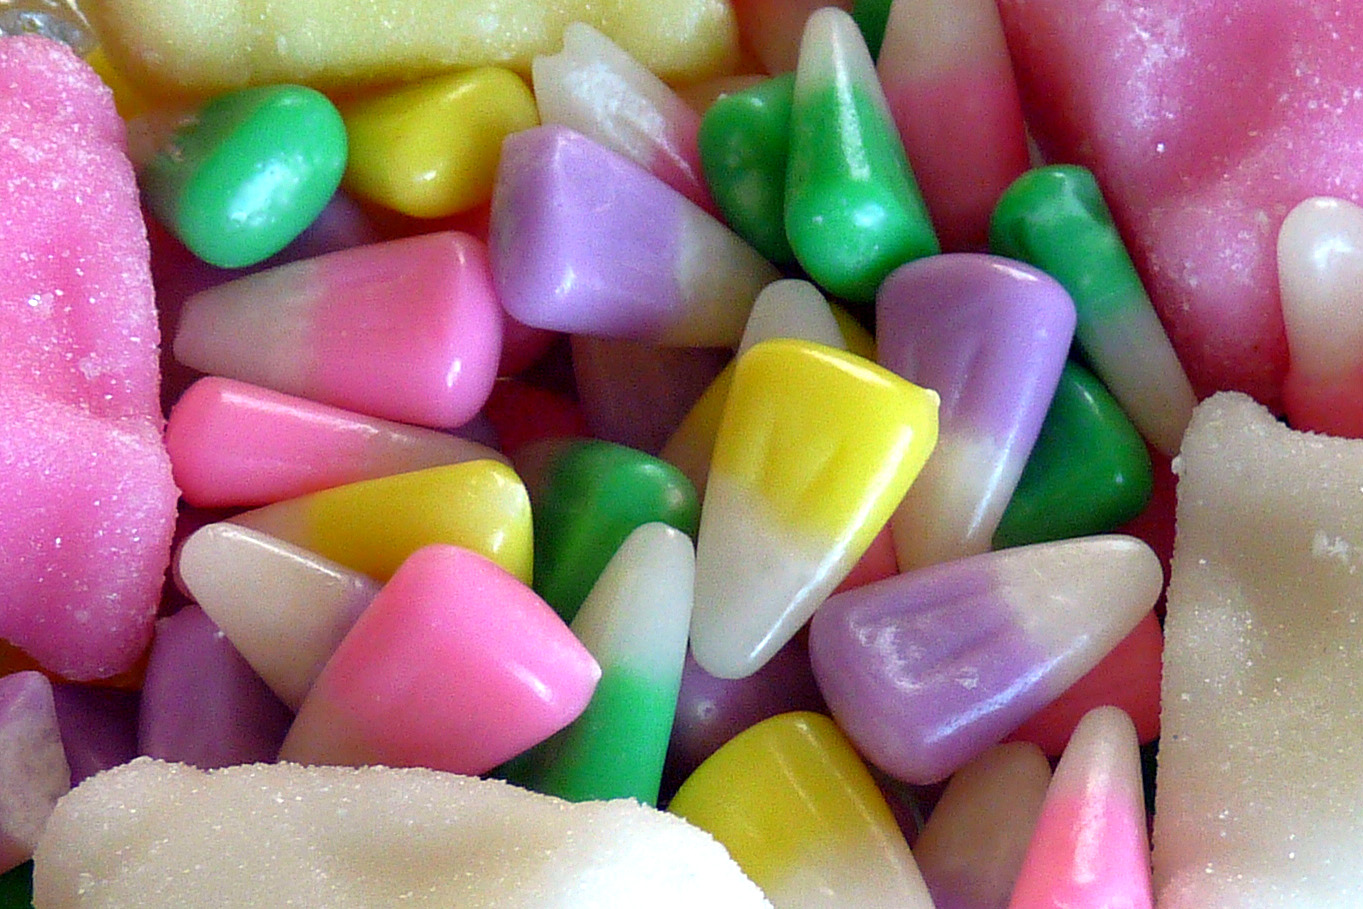 File:Easter candy corn (6918360384).jpg - Wikimedia Commons